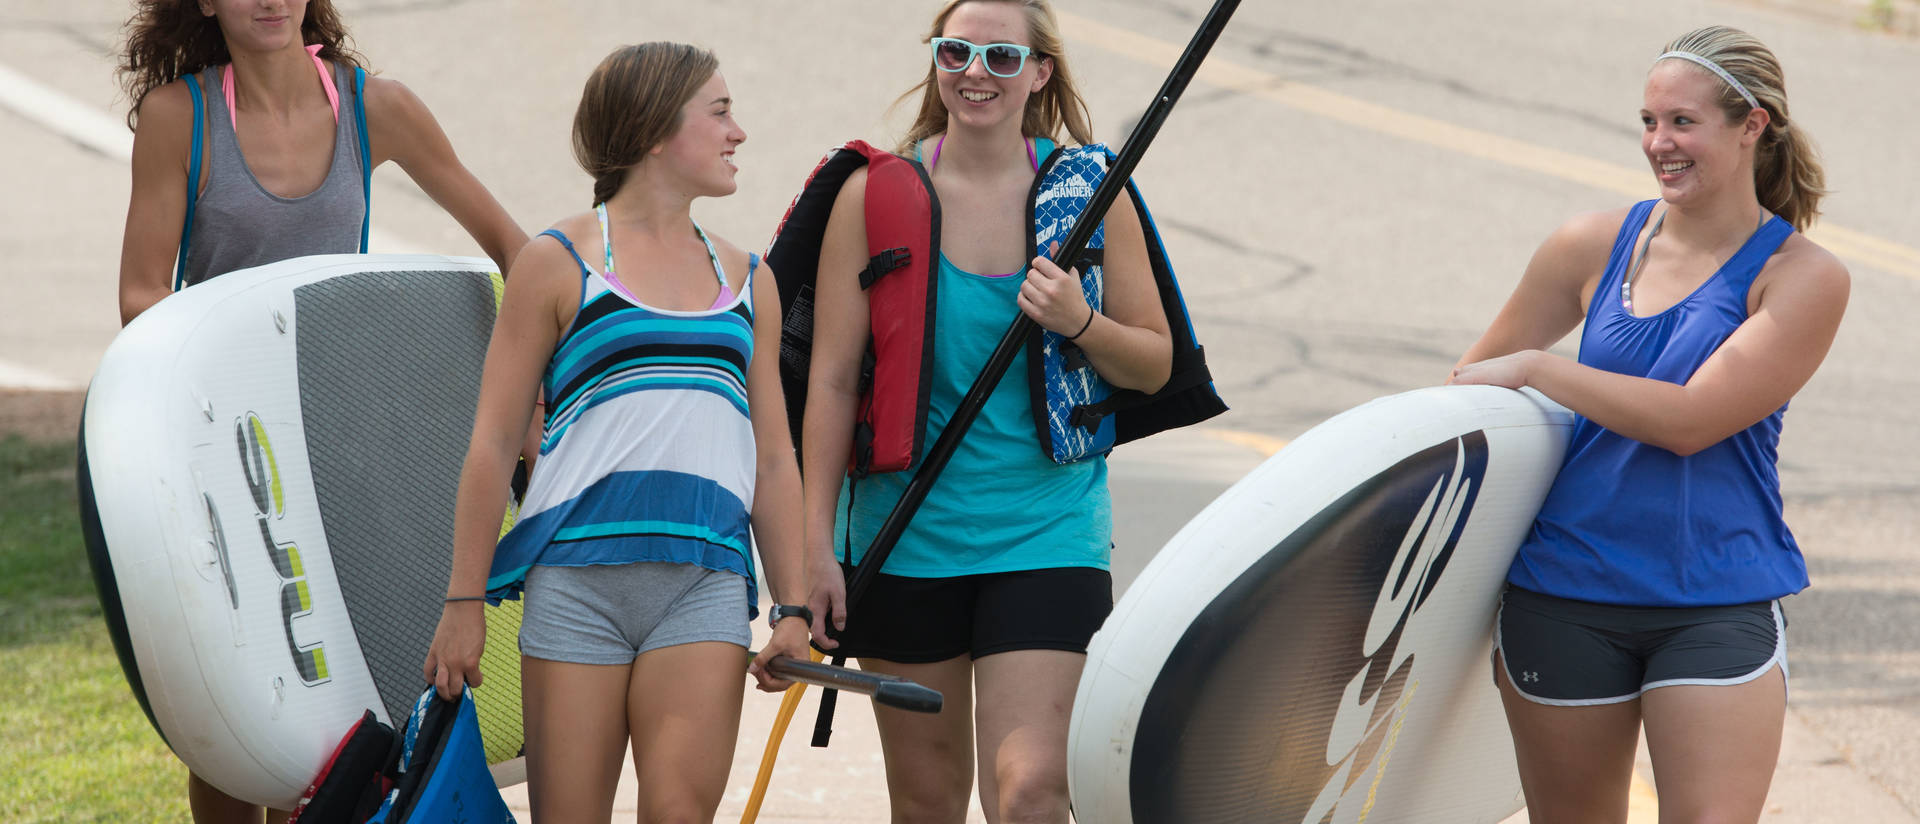 Students heading out to river float with rented paddle boards and tubes